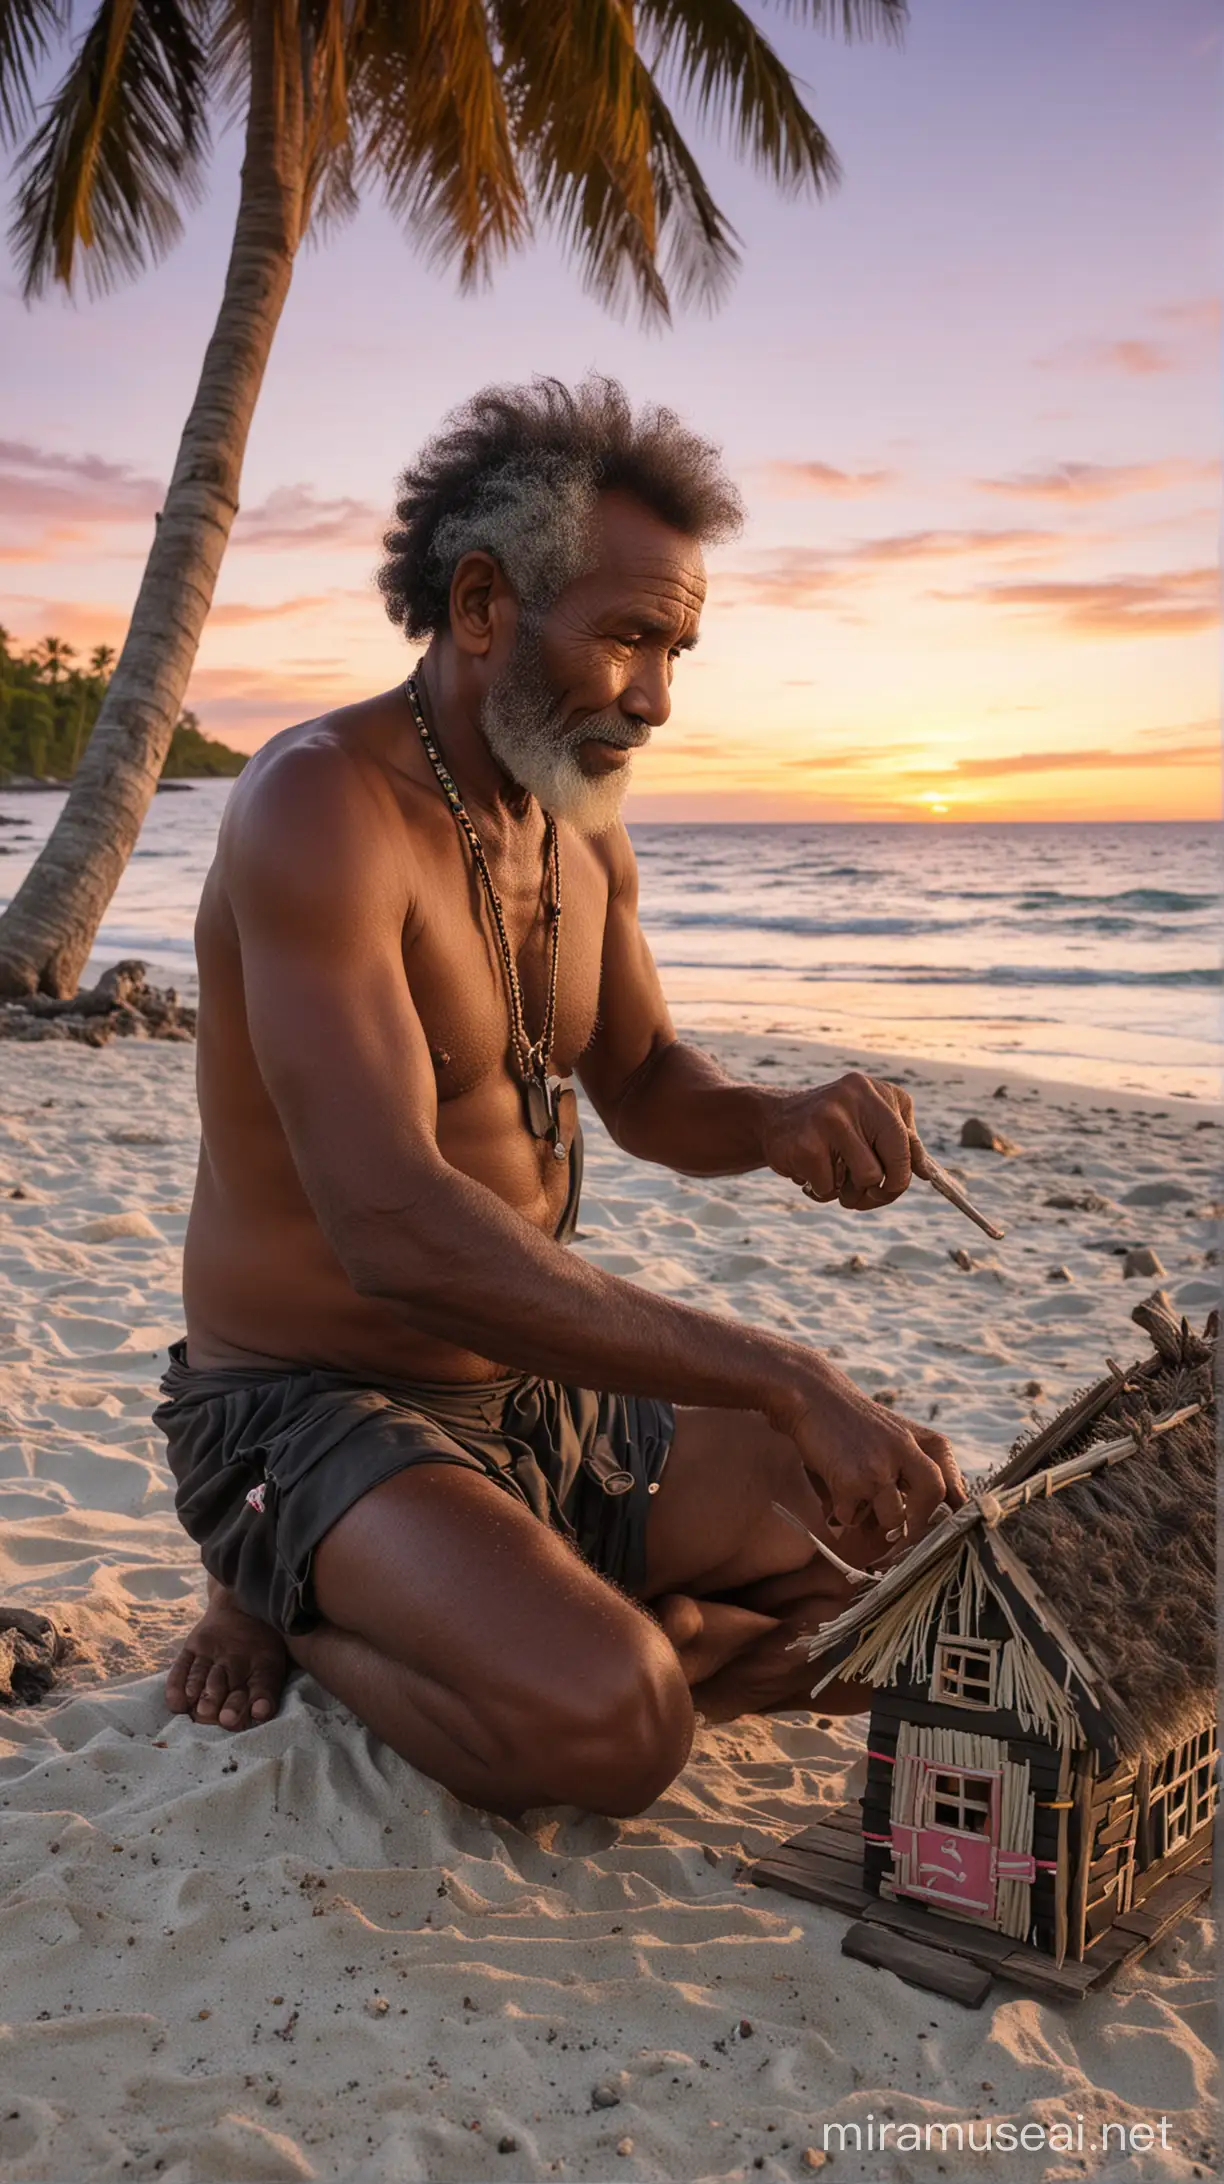 Papuan Man Crafting Toy Houses by Sunset Beach